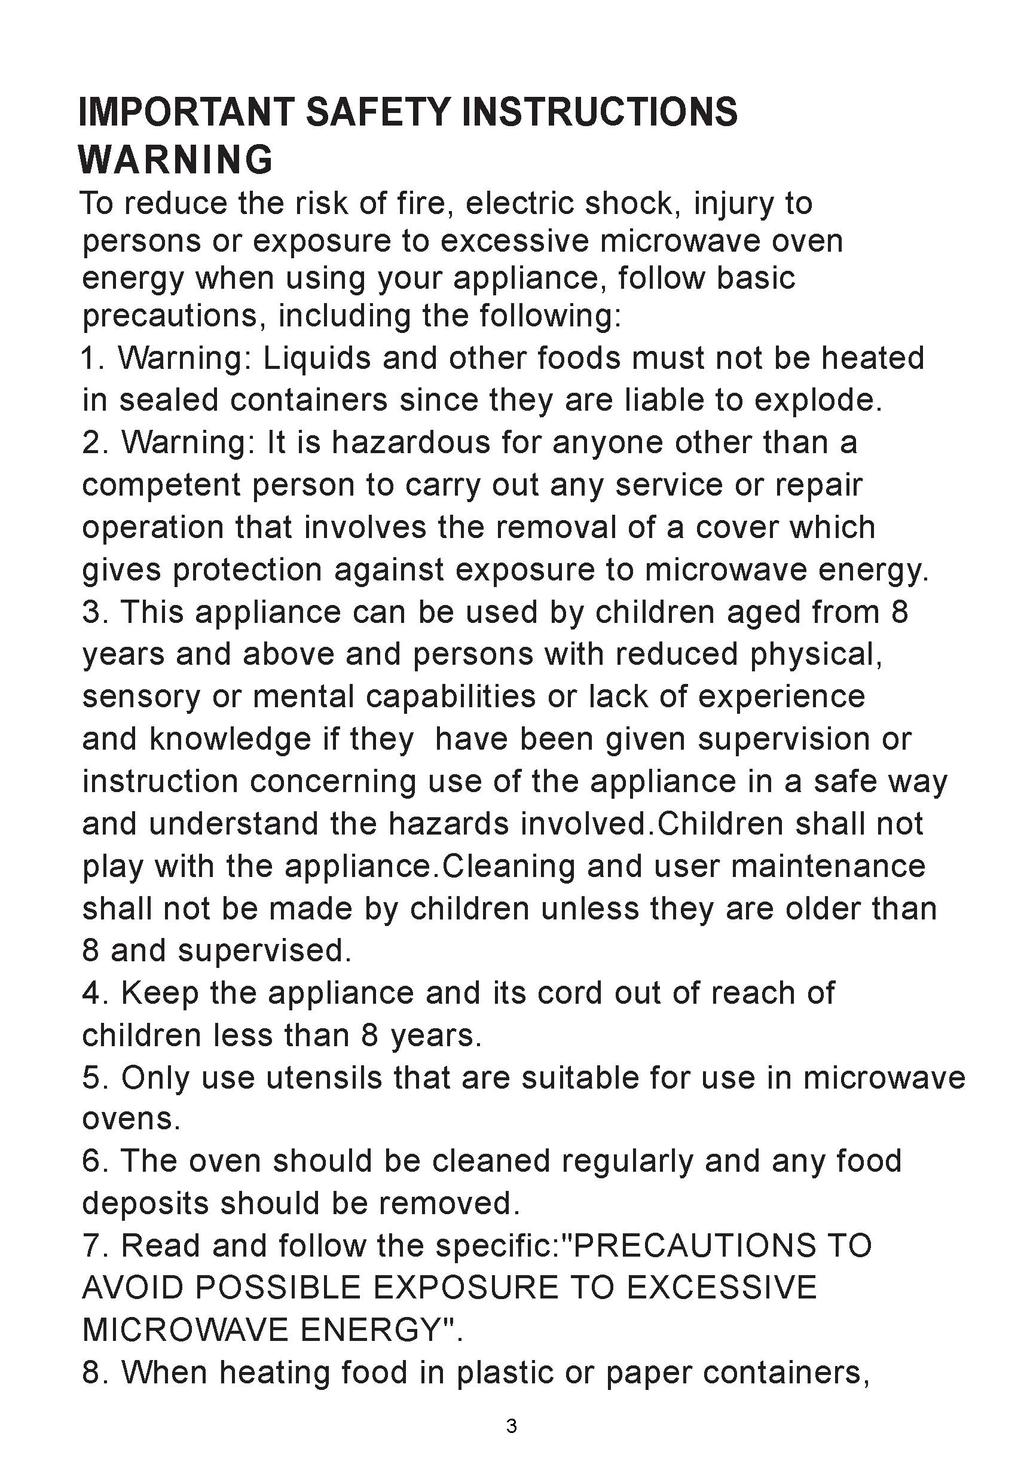 IMPORTANT SAFETY INSTRUCTIONS WARNING To reduce the risk of fire, electric shock, injury to persons or exposure to excessive microwave oven energy when using your appliance, follow basic precautions,